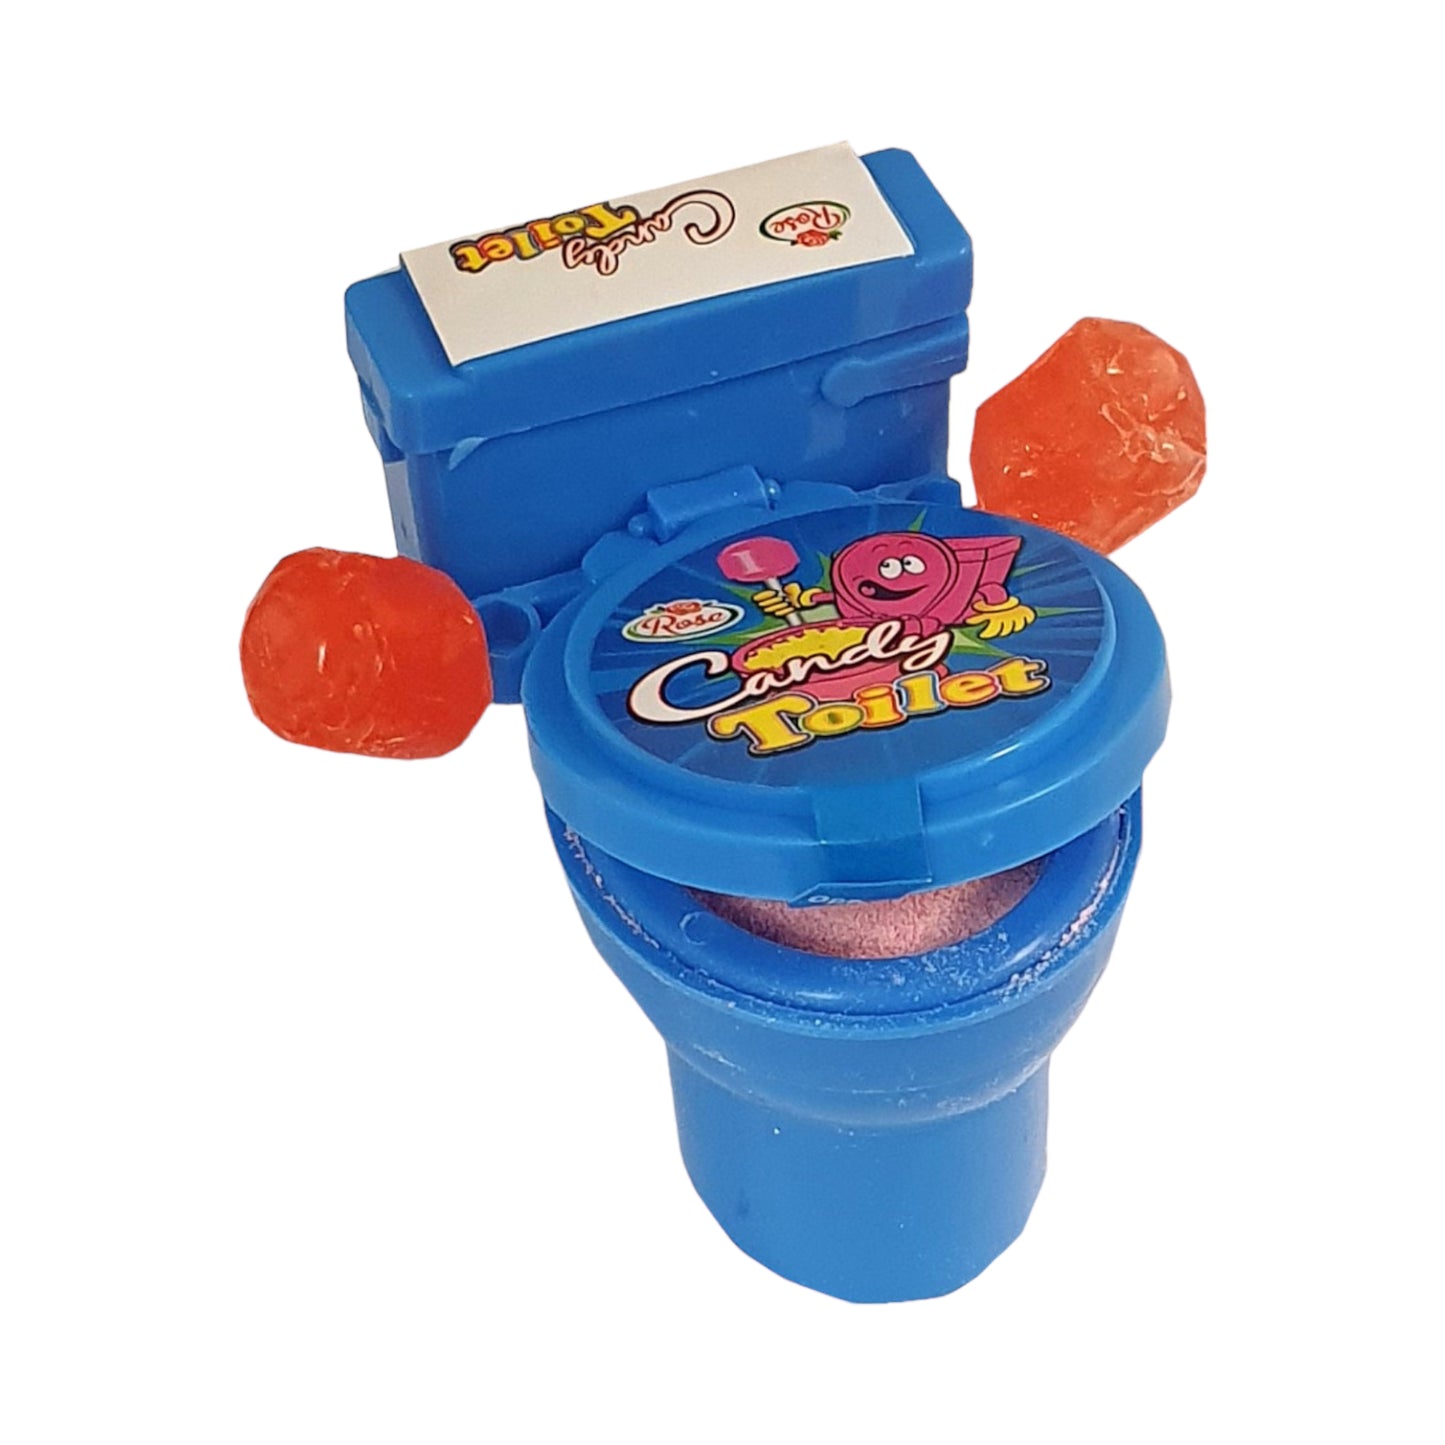 Candy Toilet - 15g